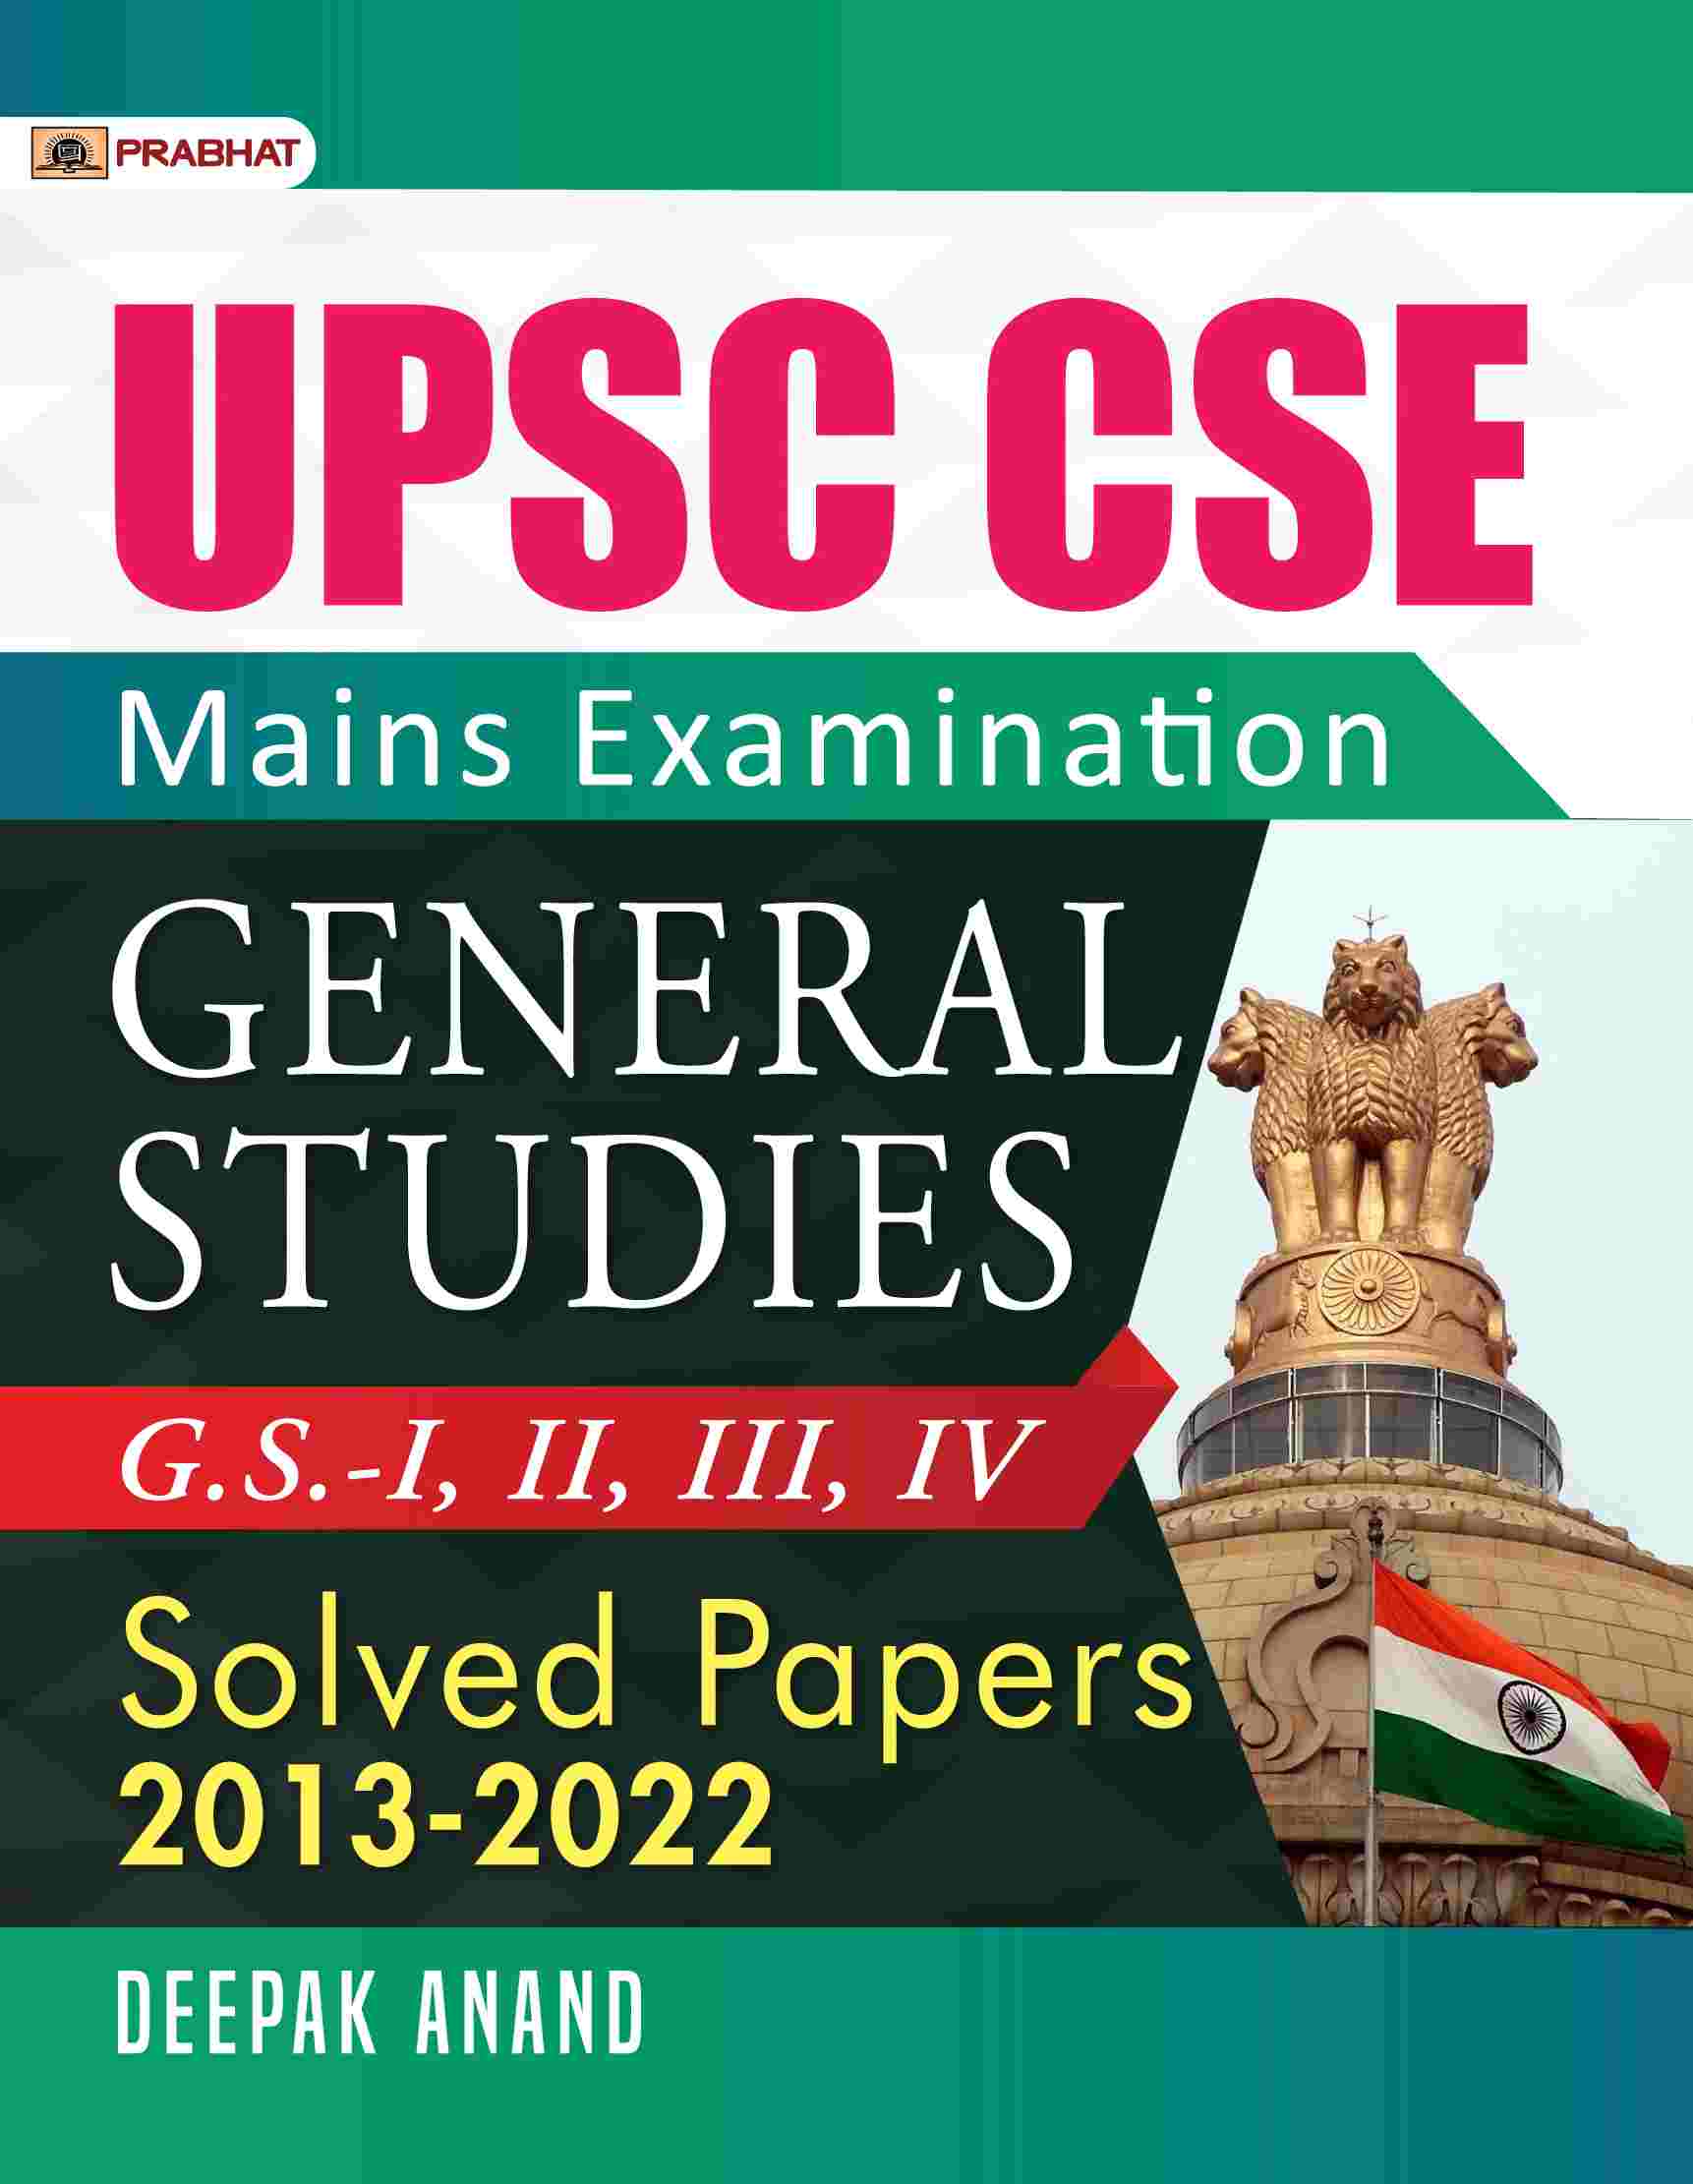 UPSC CSE Mains Examination General Studies (G.S. Paper I, II, III, IV) Solved Papers 2013-2022